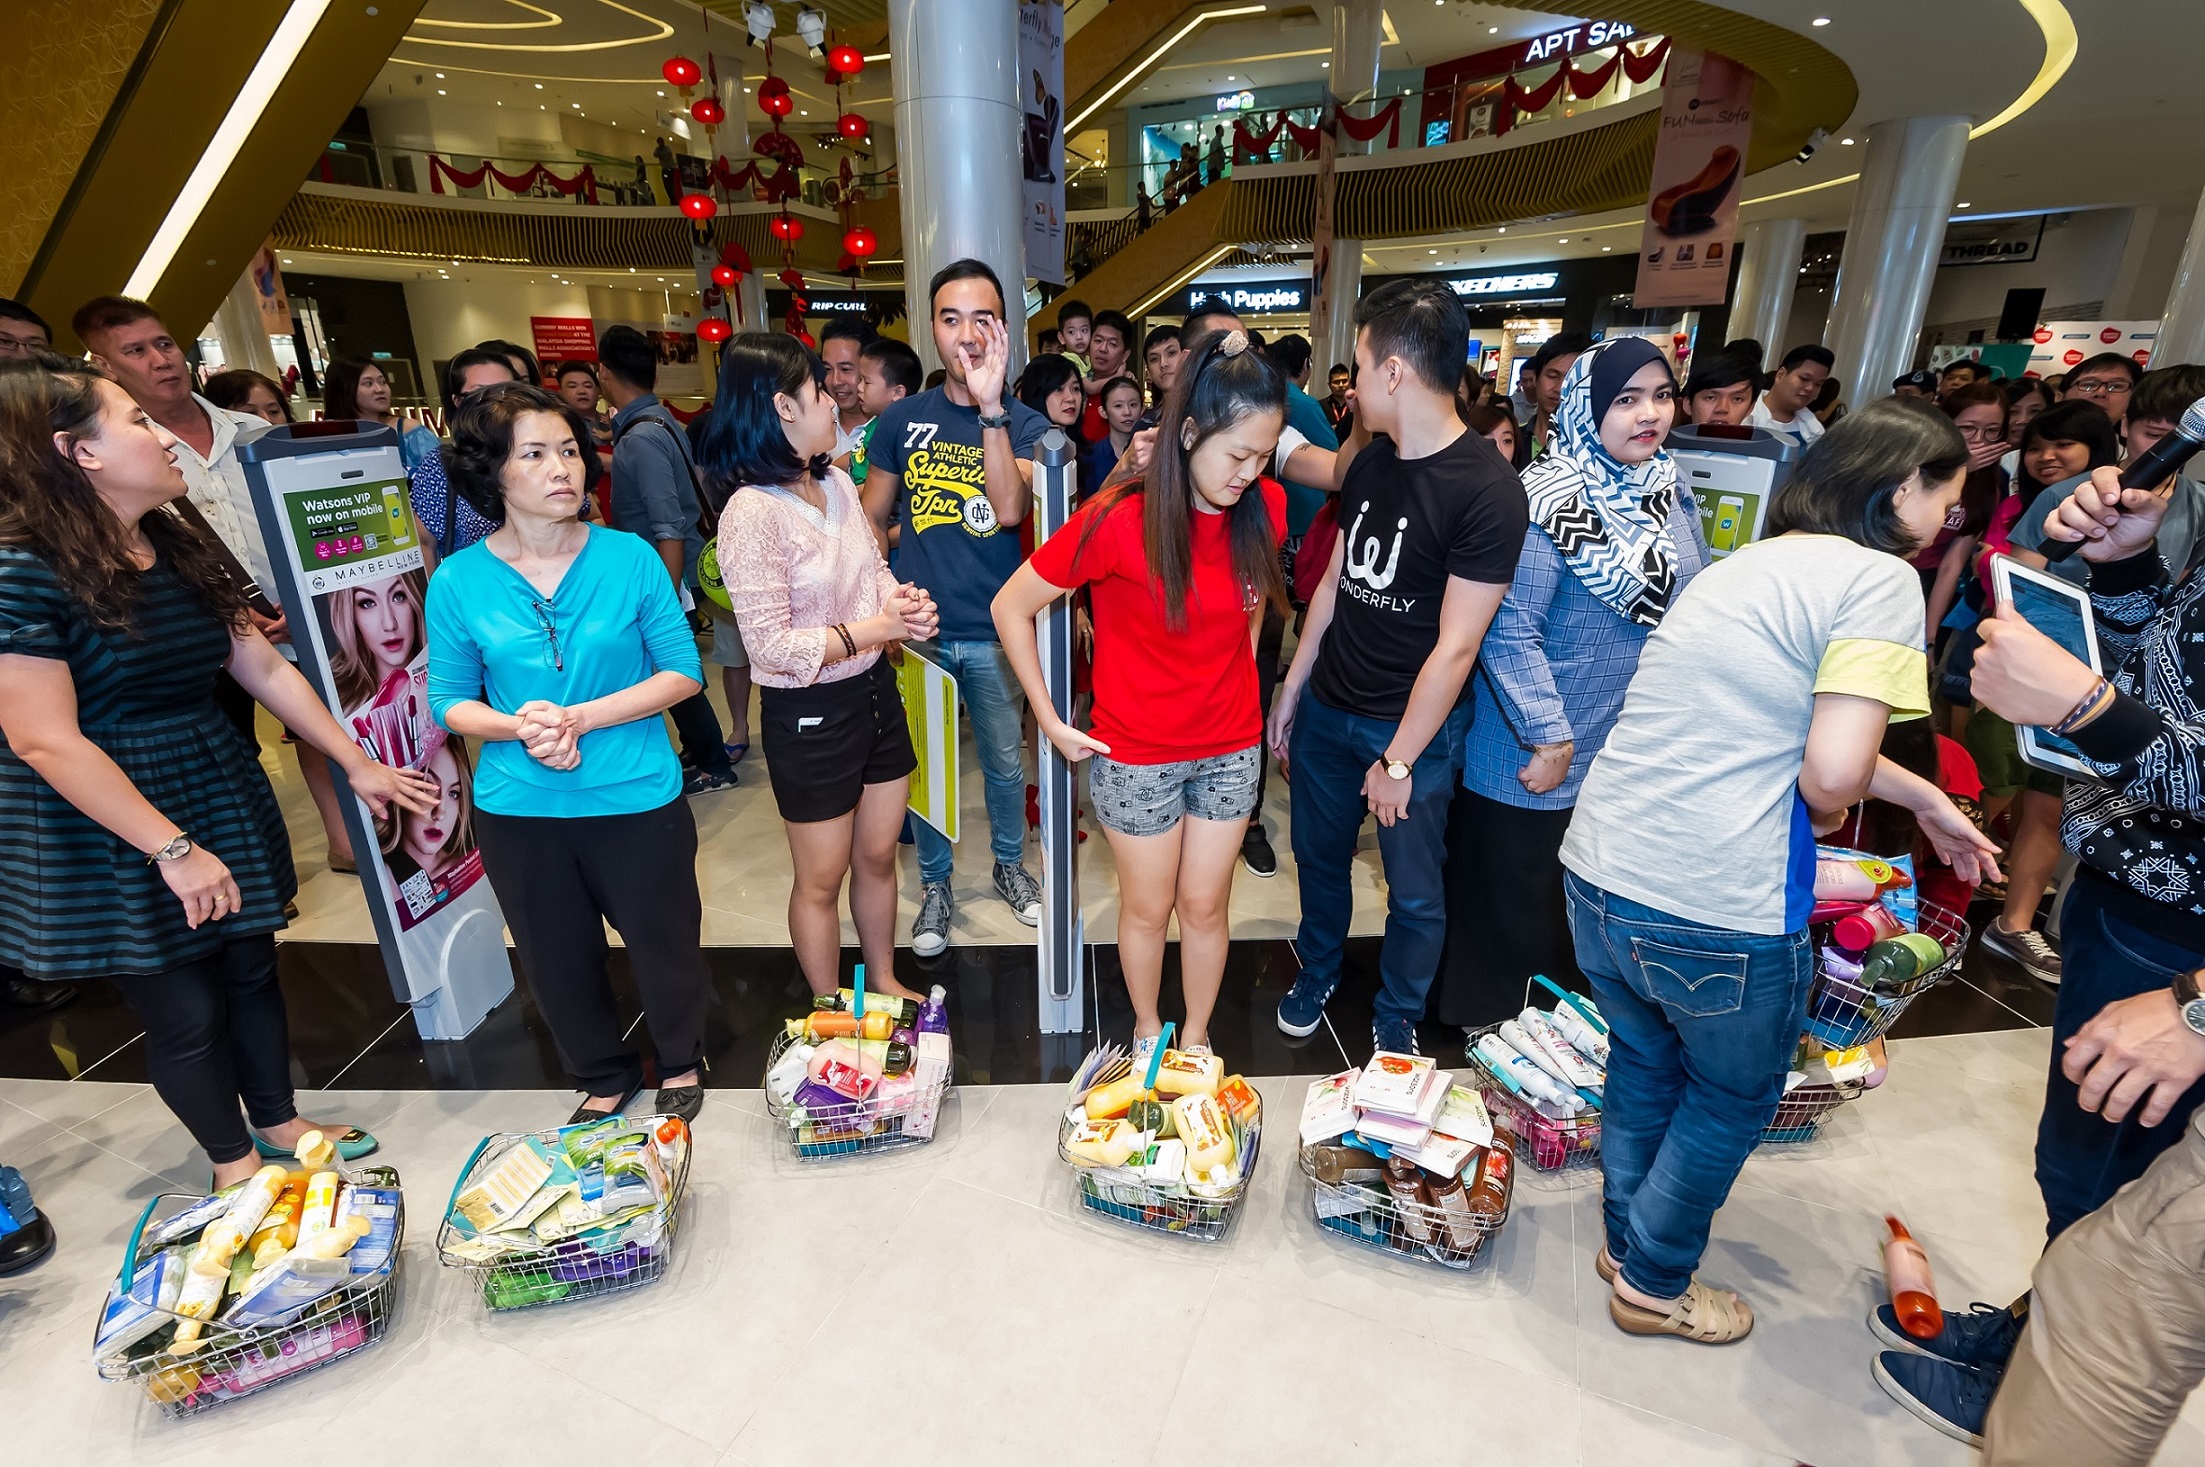 Watsons VIP Members with their shopping basket filled with Watsons Brand products after the shopping spree.